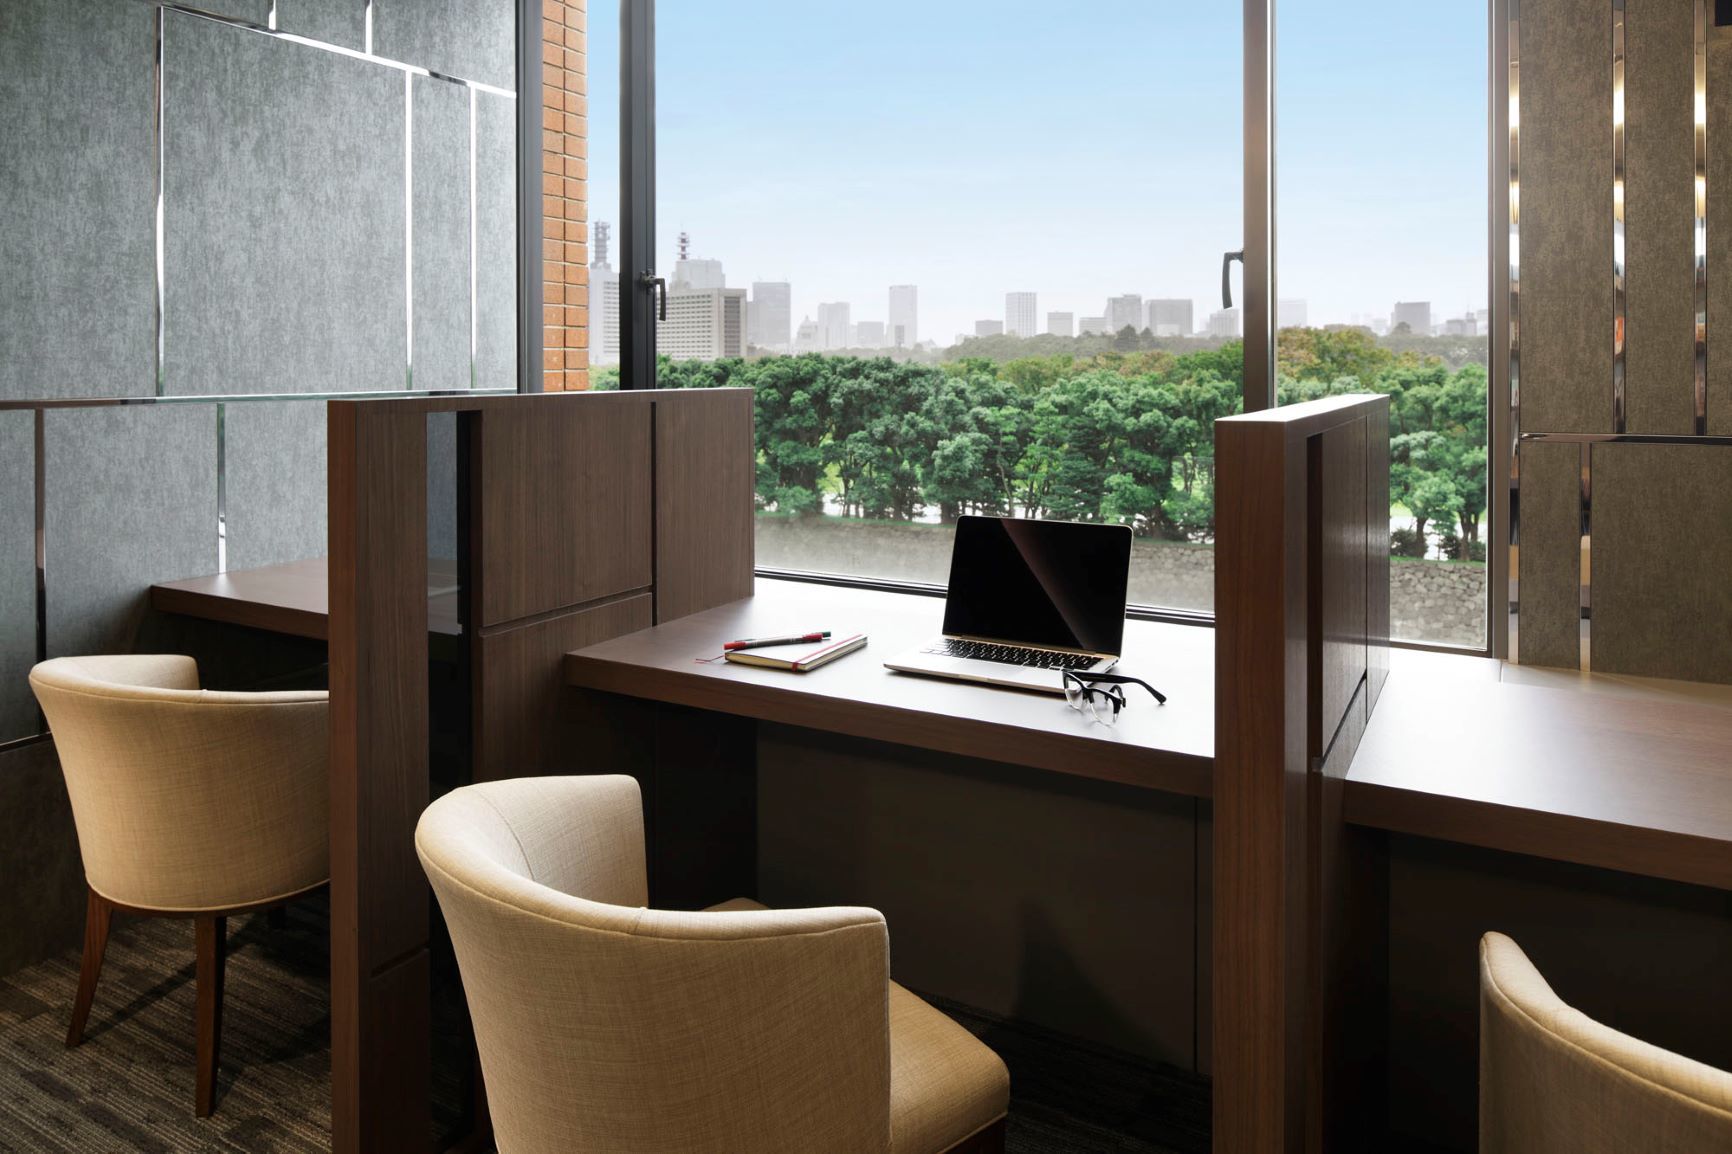 Lounge_Solo work seating with partitions, ideal for concentrated work and refreshment.